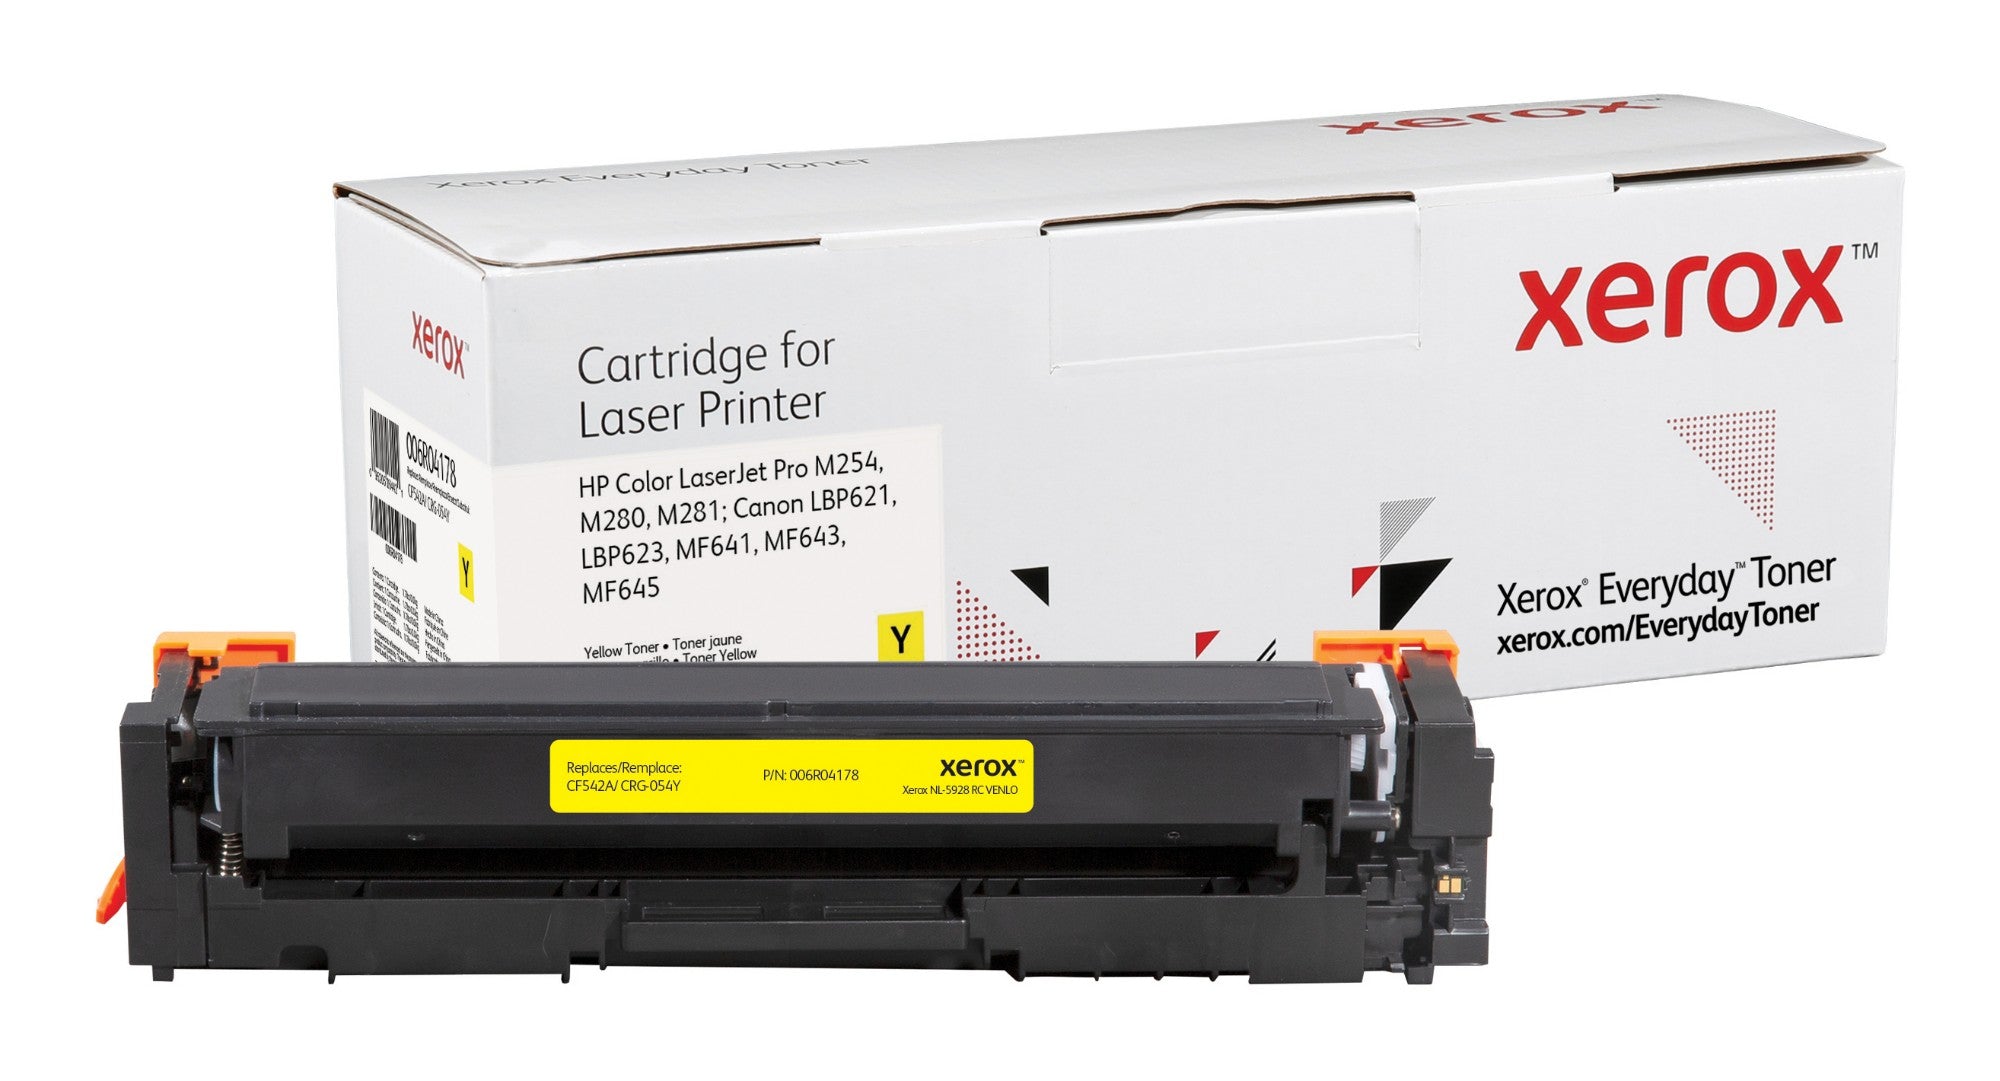 Xerox 006R04178 Toner cartridge yellow, 1.3K pages (replaces Canon 054 HP 203A/CF542A) for Canon LBP-640/HP Pro M 254